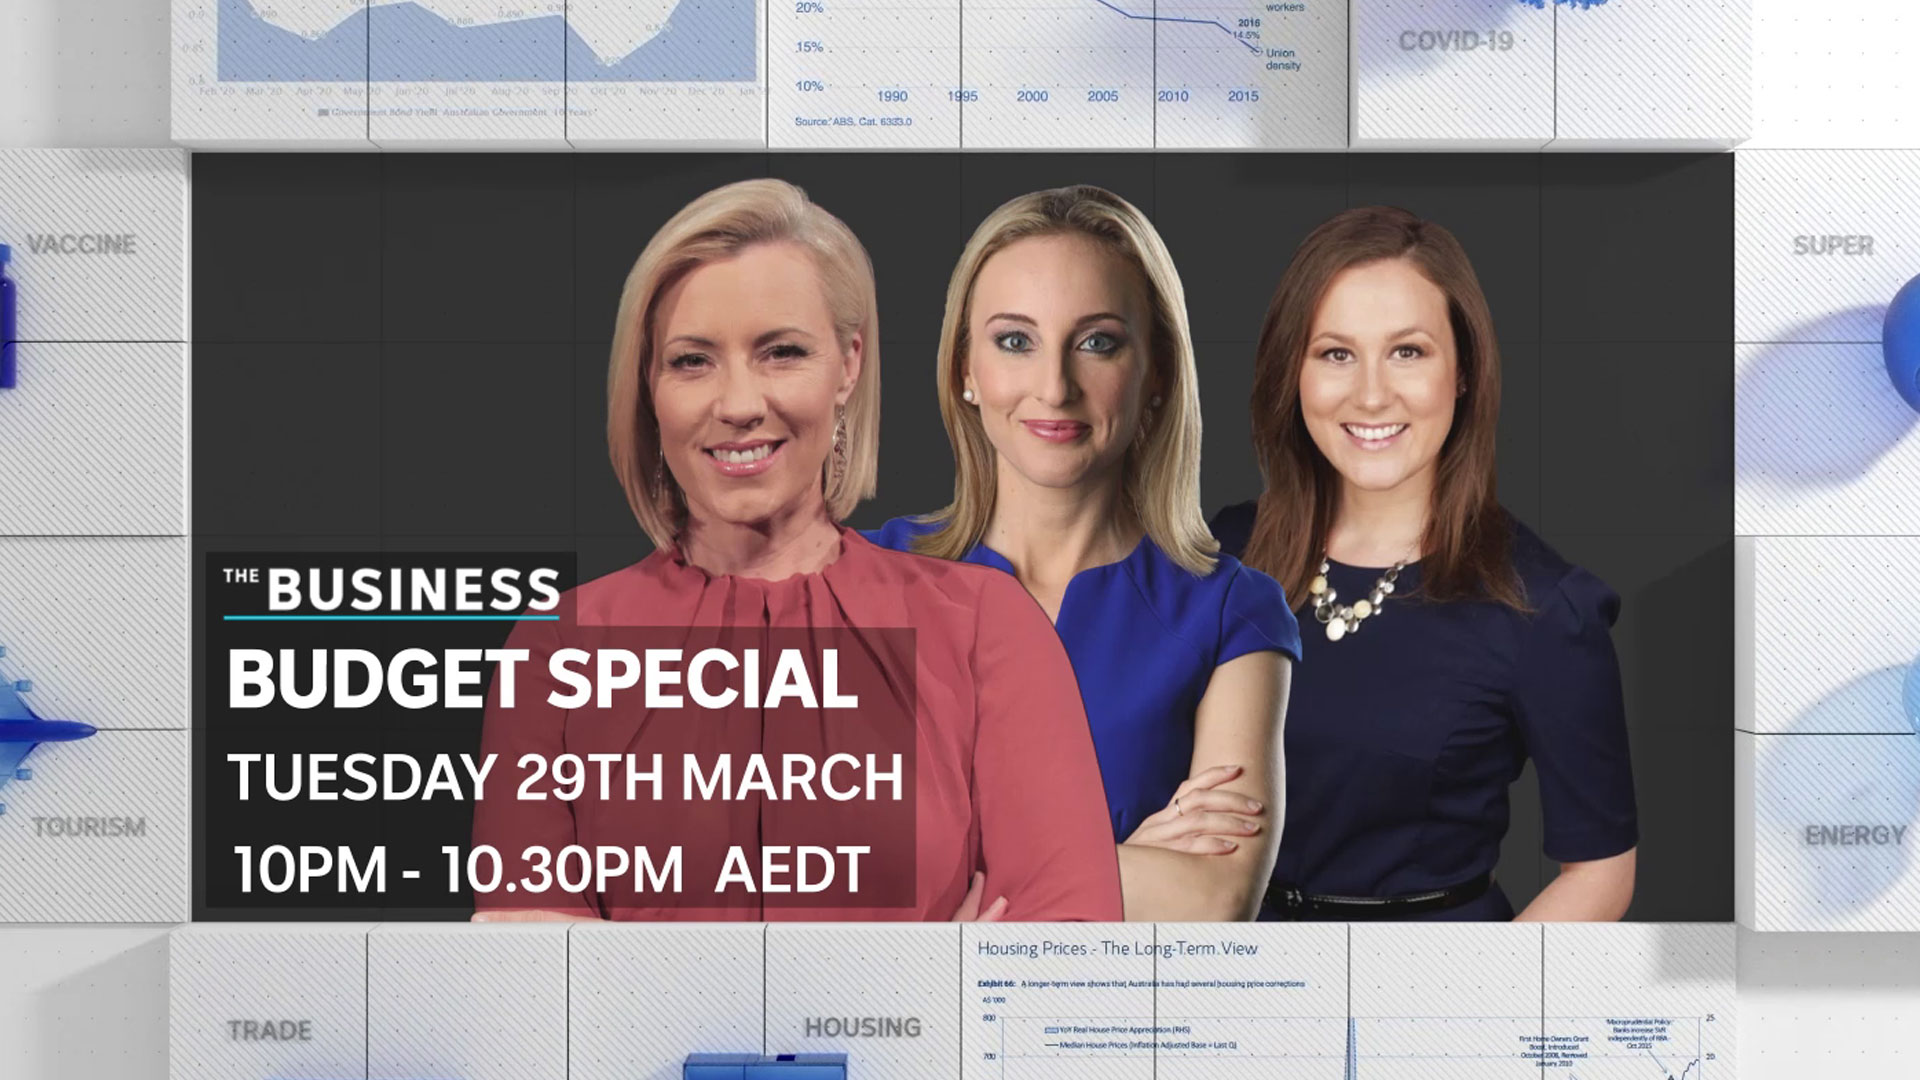 The Business budget special with photos of Kathryn Robinson, Alicia Barry and Rachel Pupazzoni